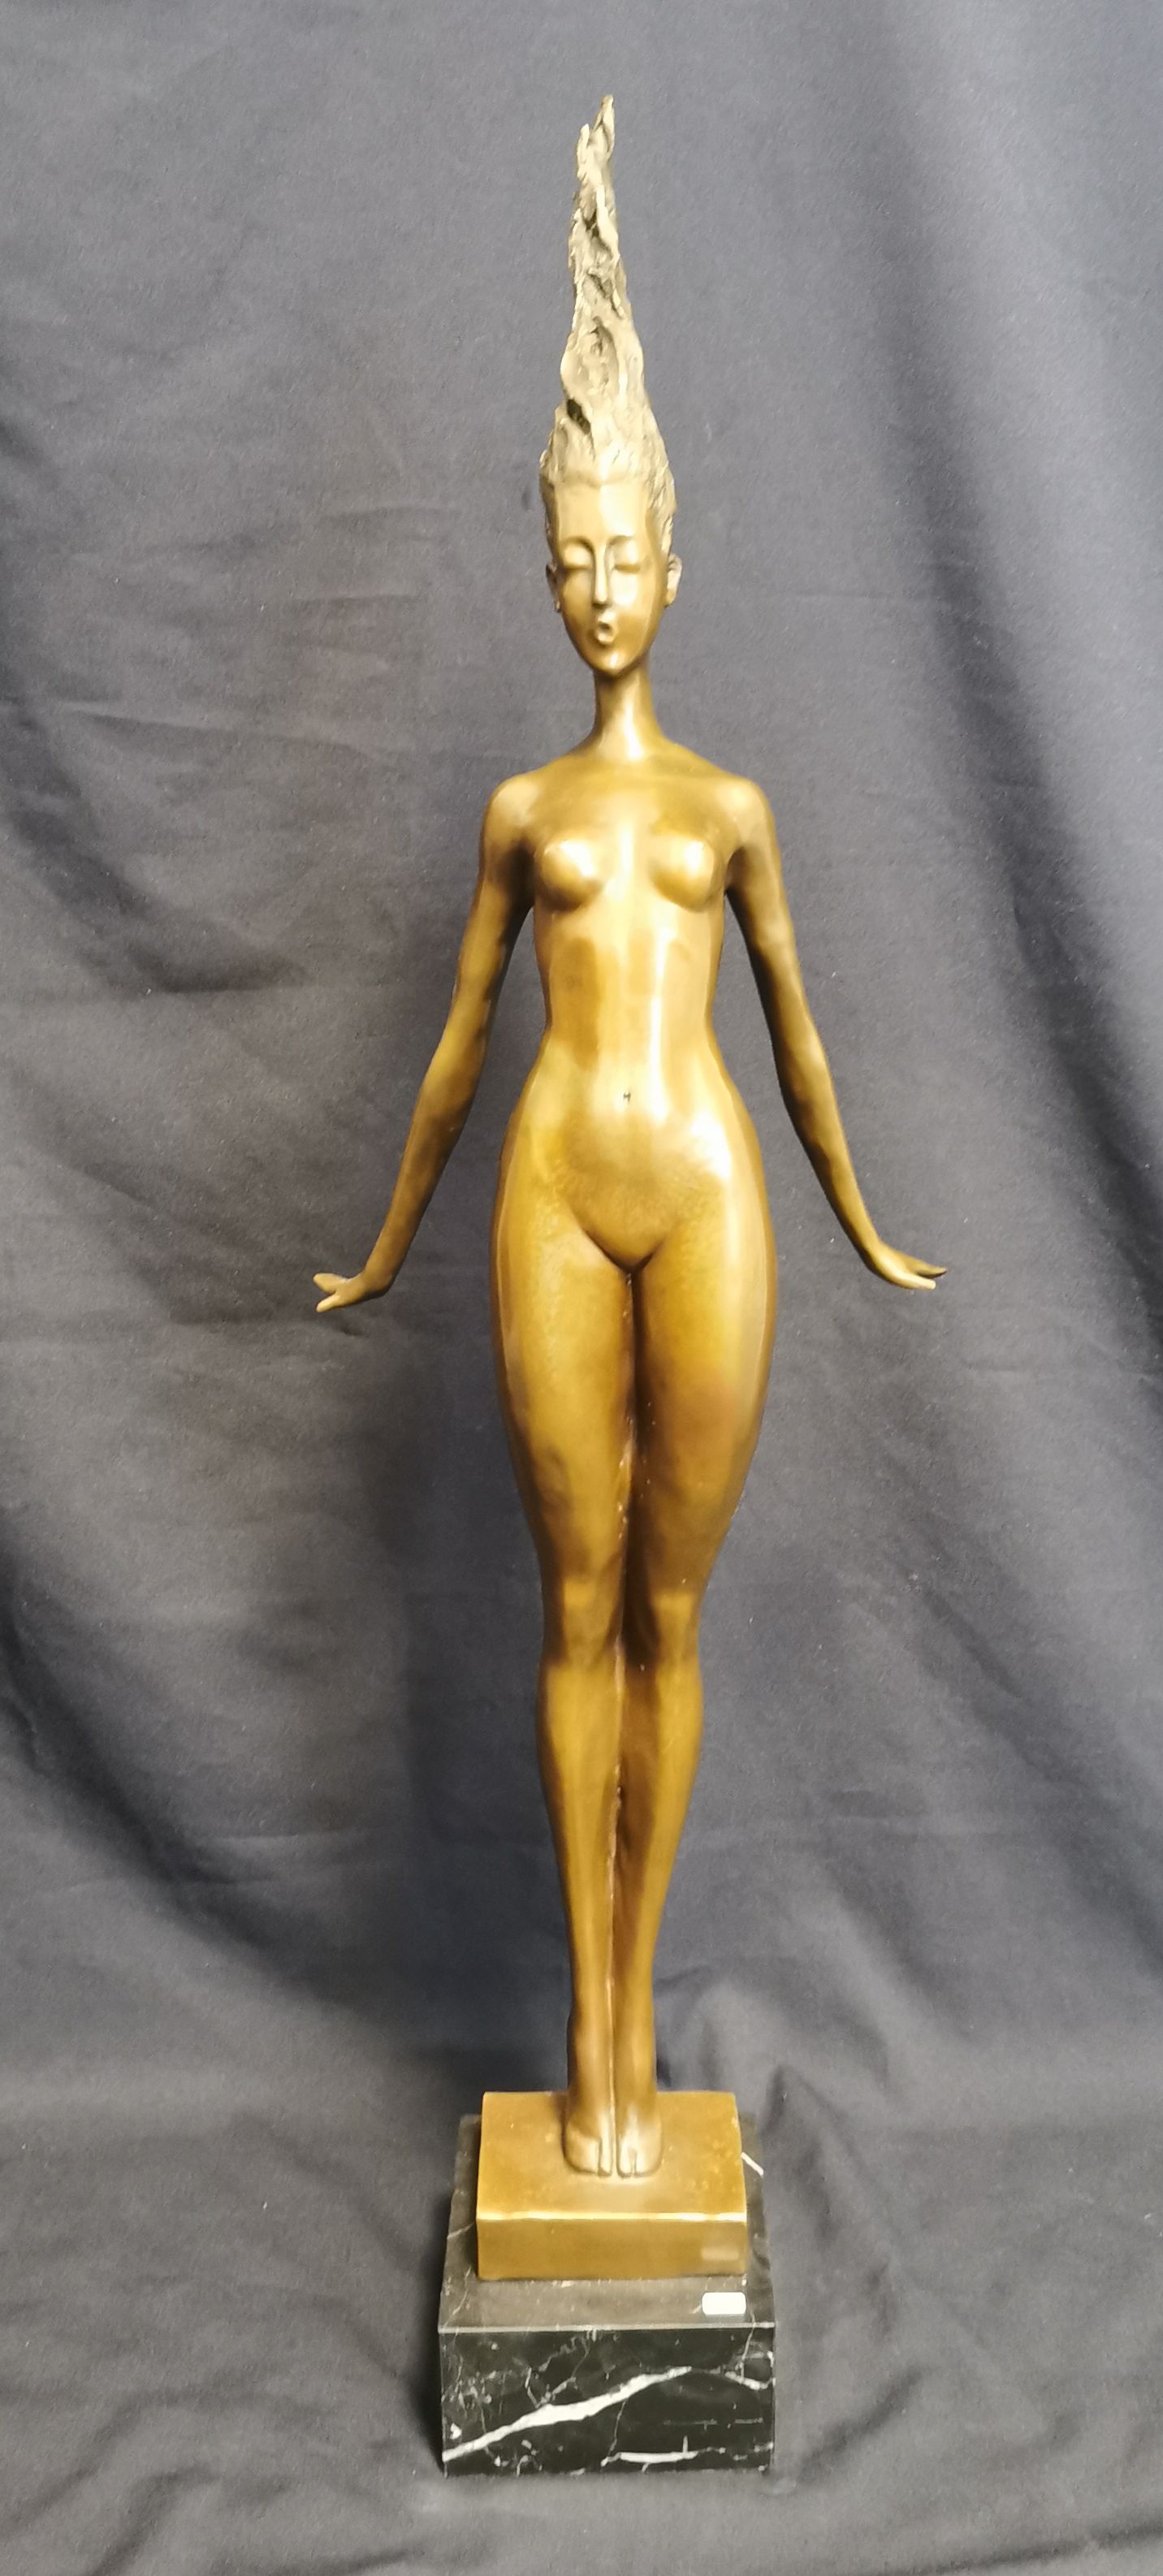 SCULPTURE "FEMALE NUDE / STANDING WOMAN"